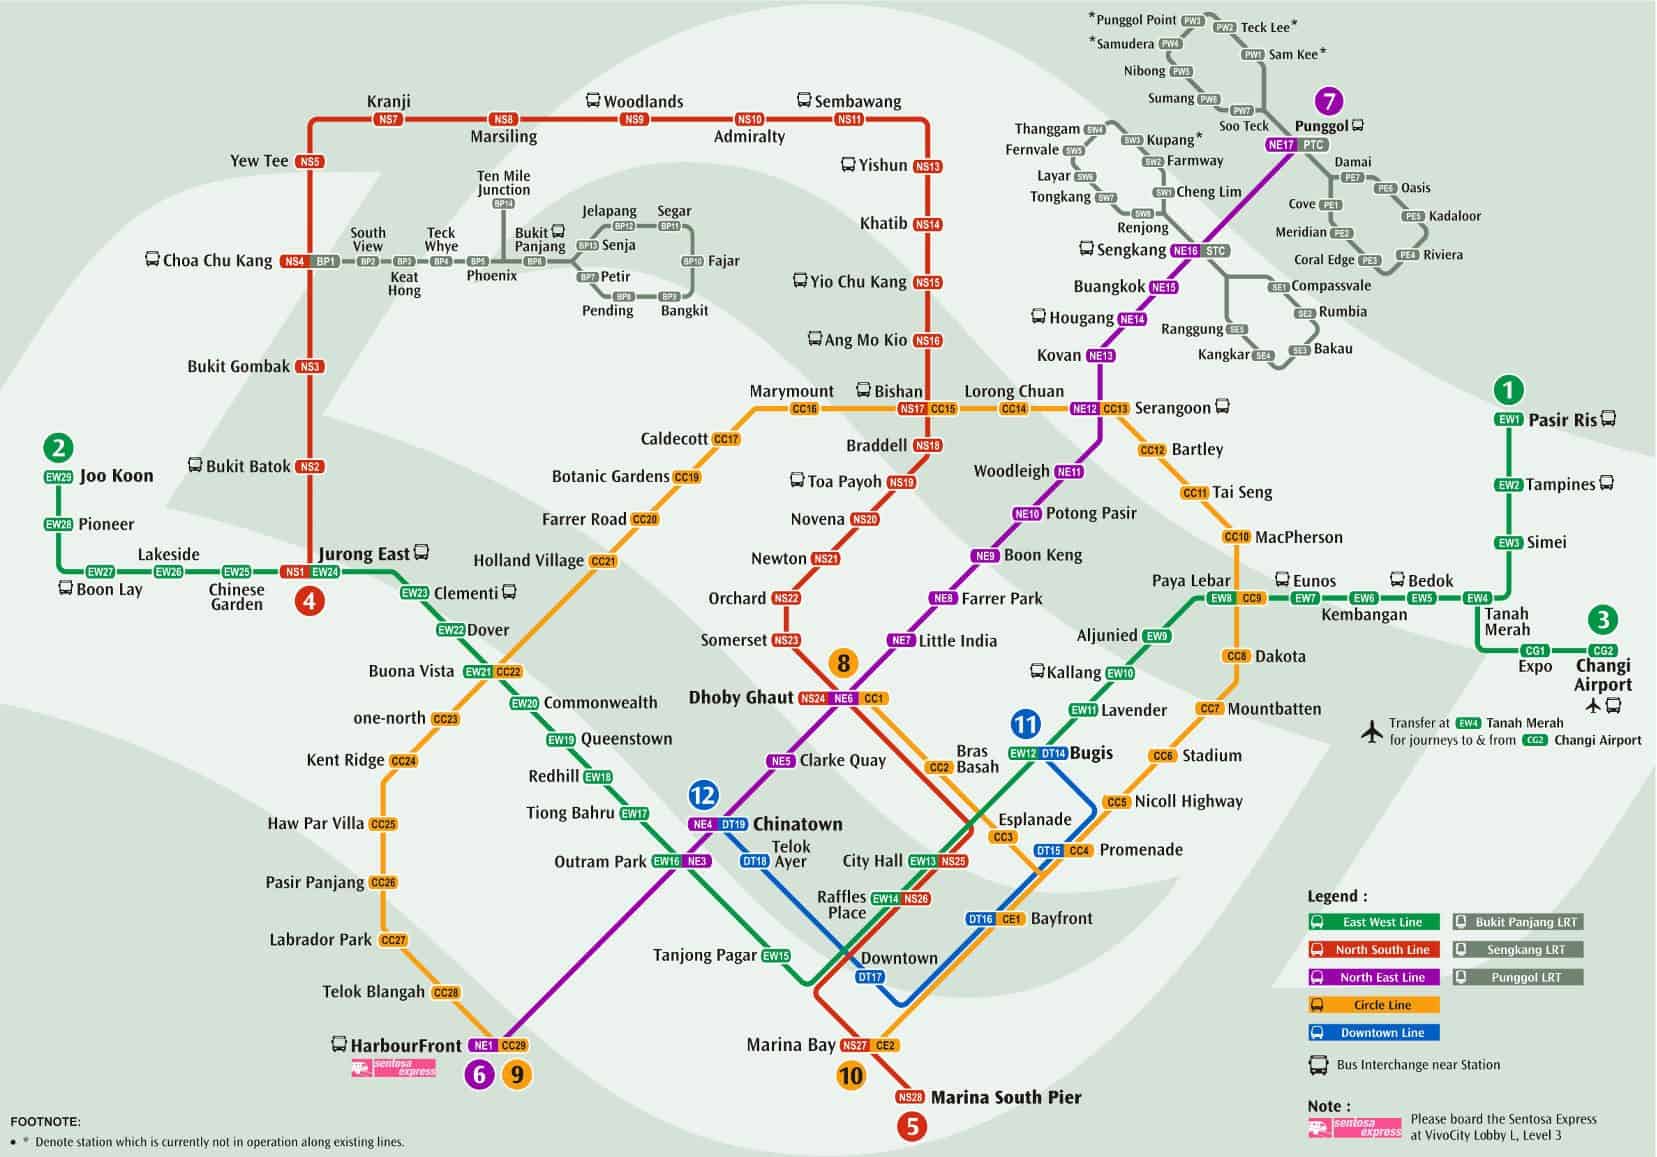 map for mrt singapore